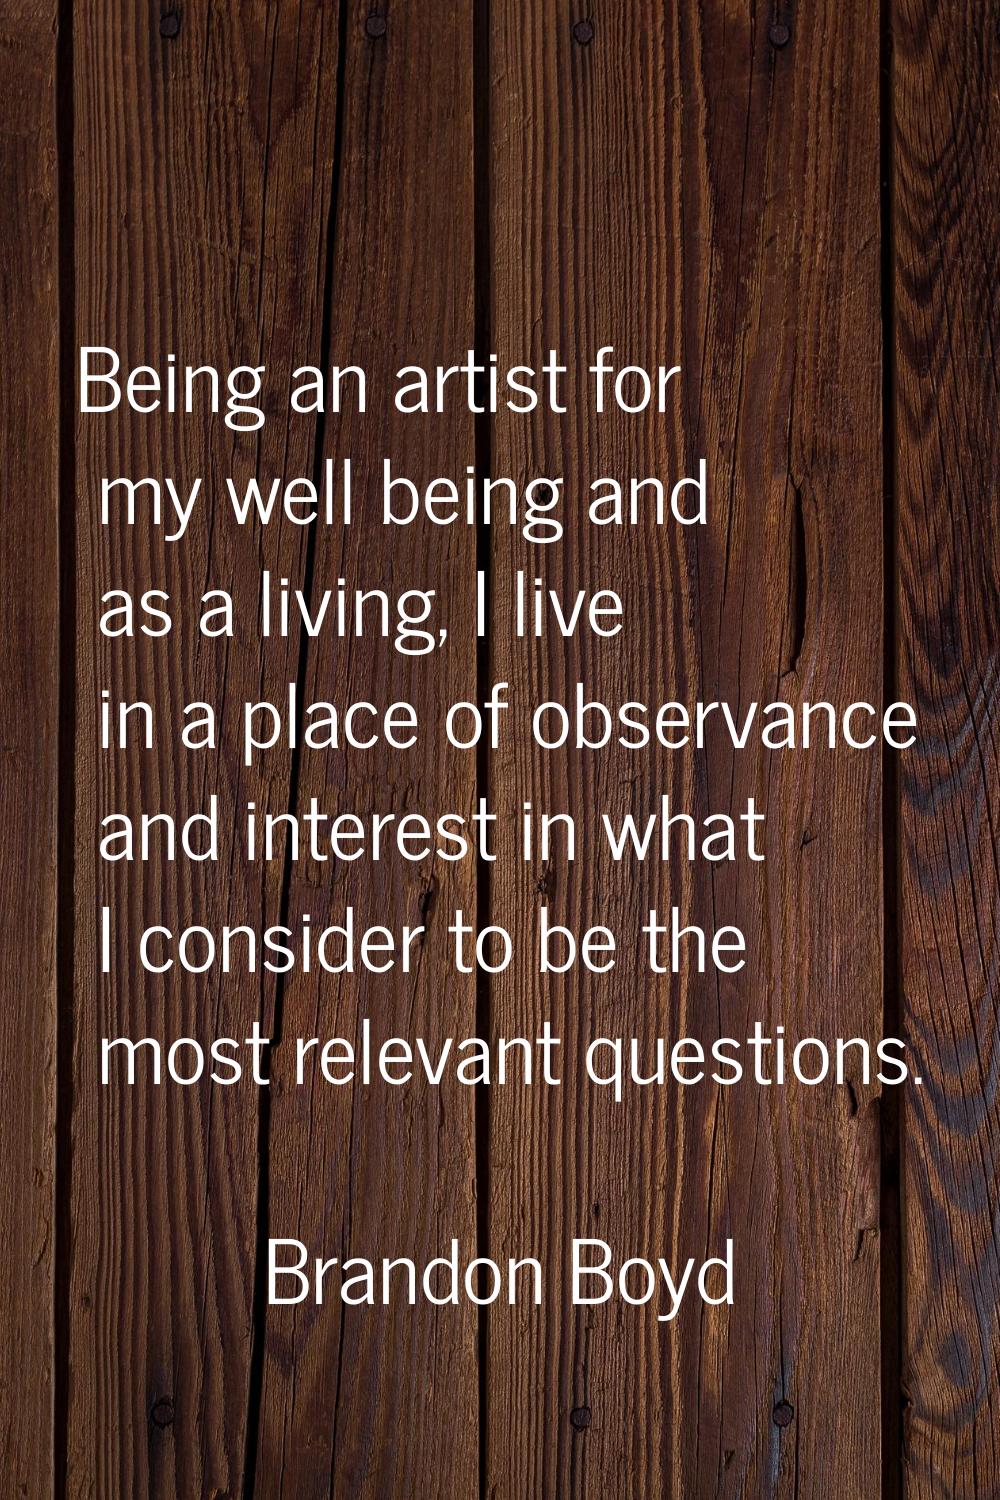 Being an artist for my well being and as a living, I live in a place of observance and interest in 